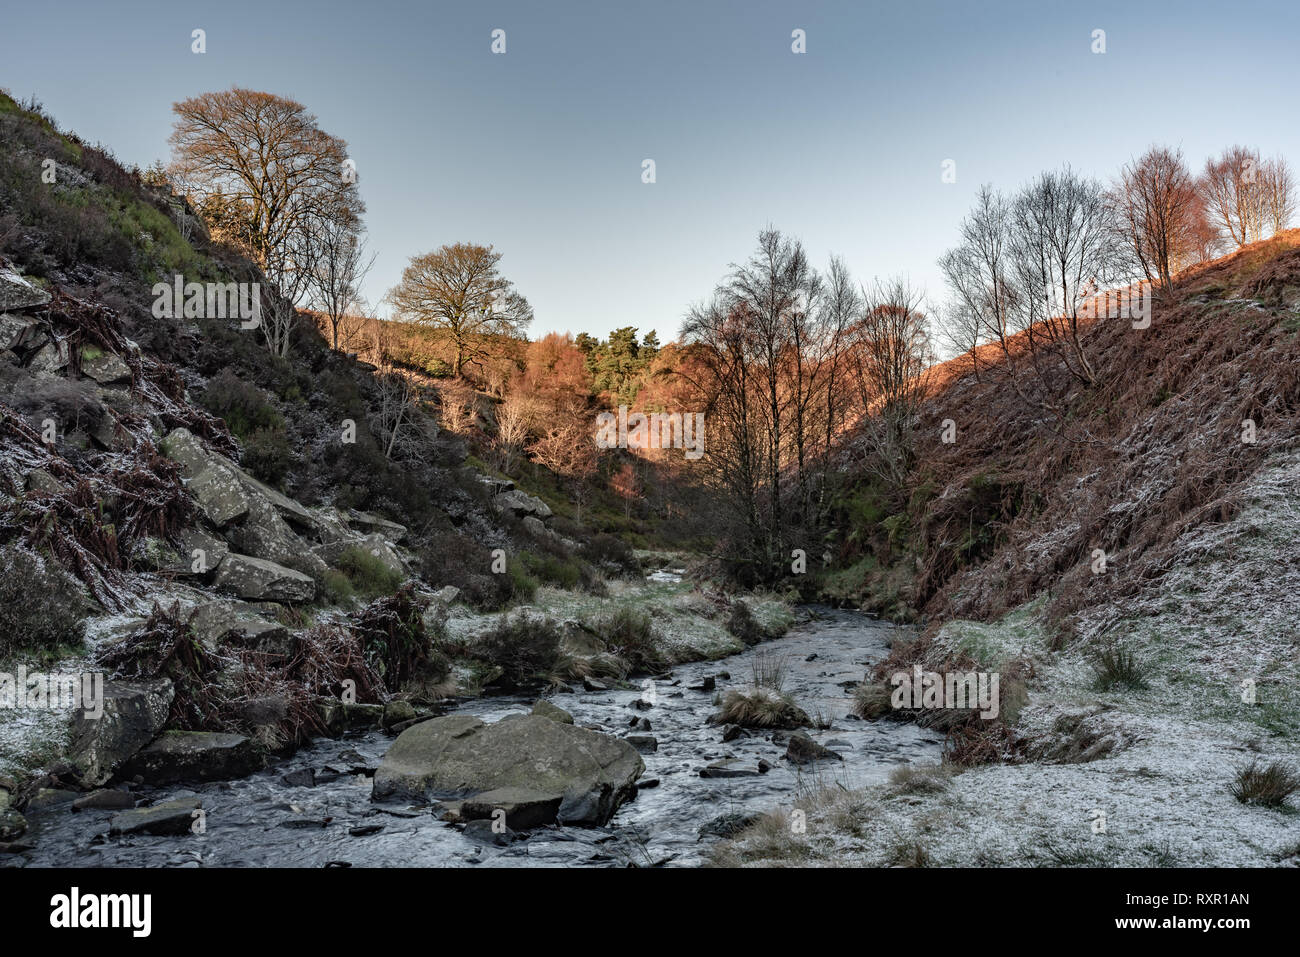 A packhorse bridge at Goyt valley within the Peak District National Park. Stock Photo